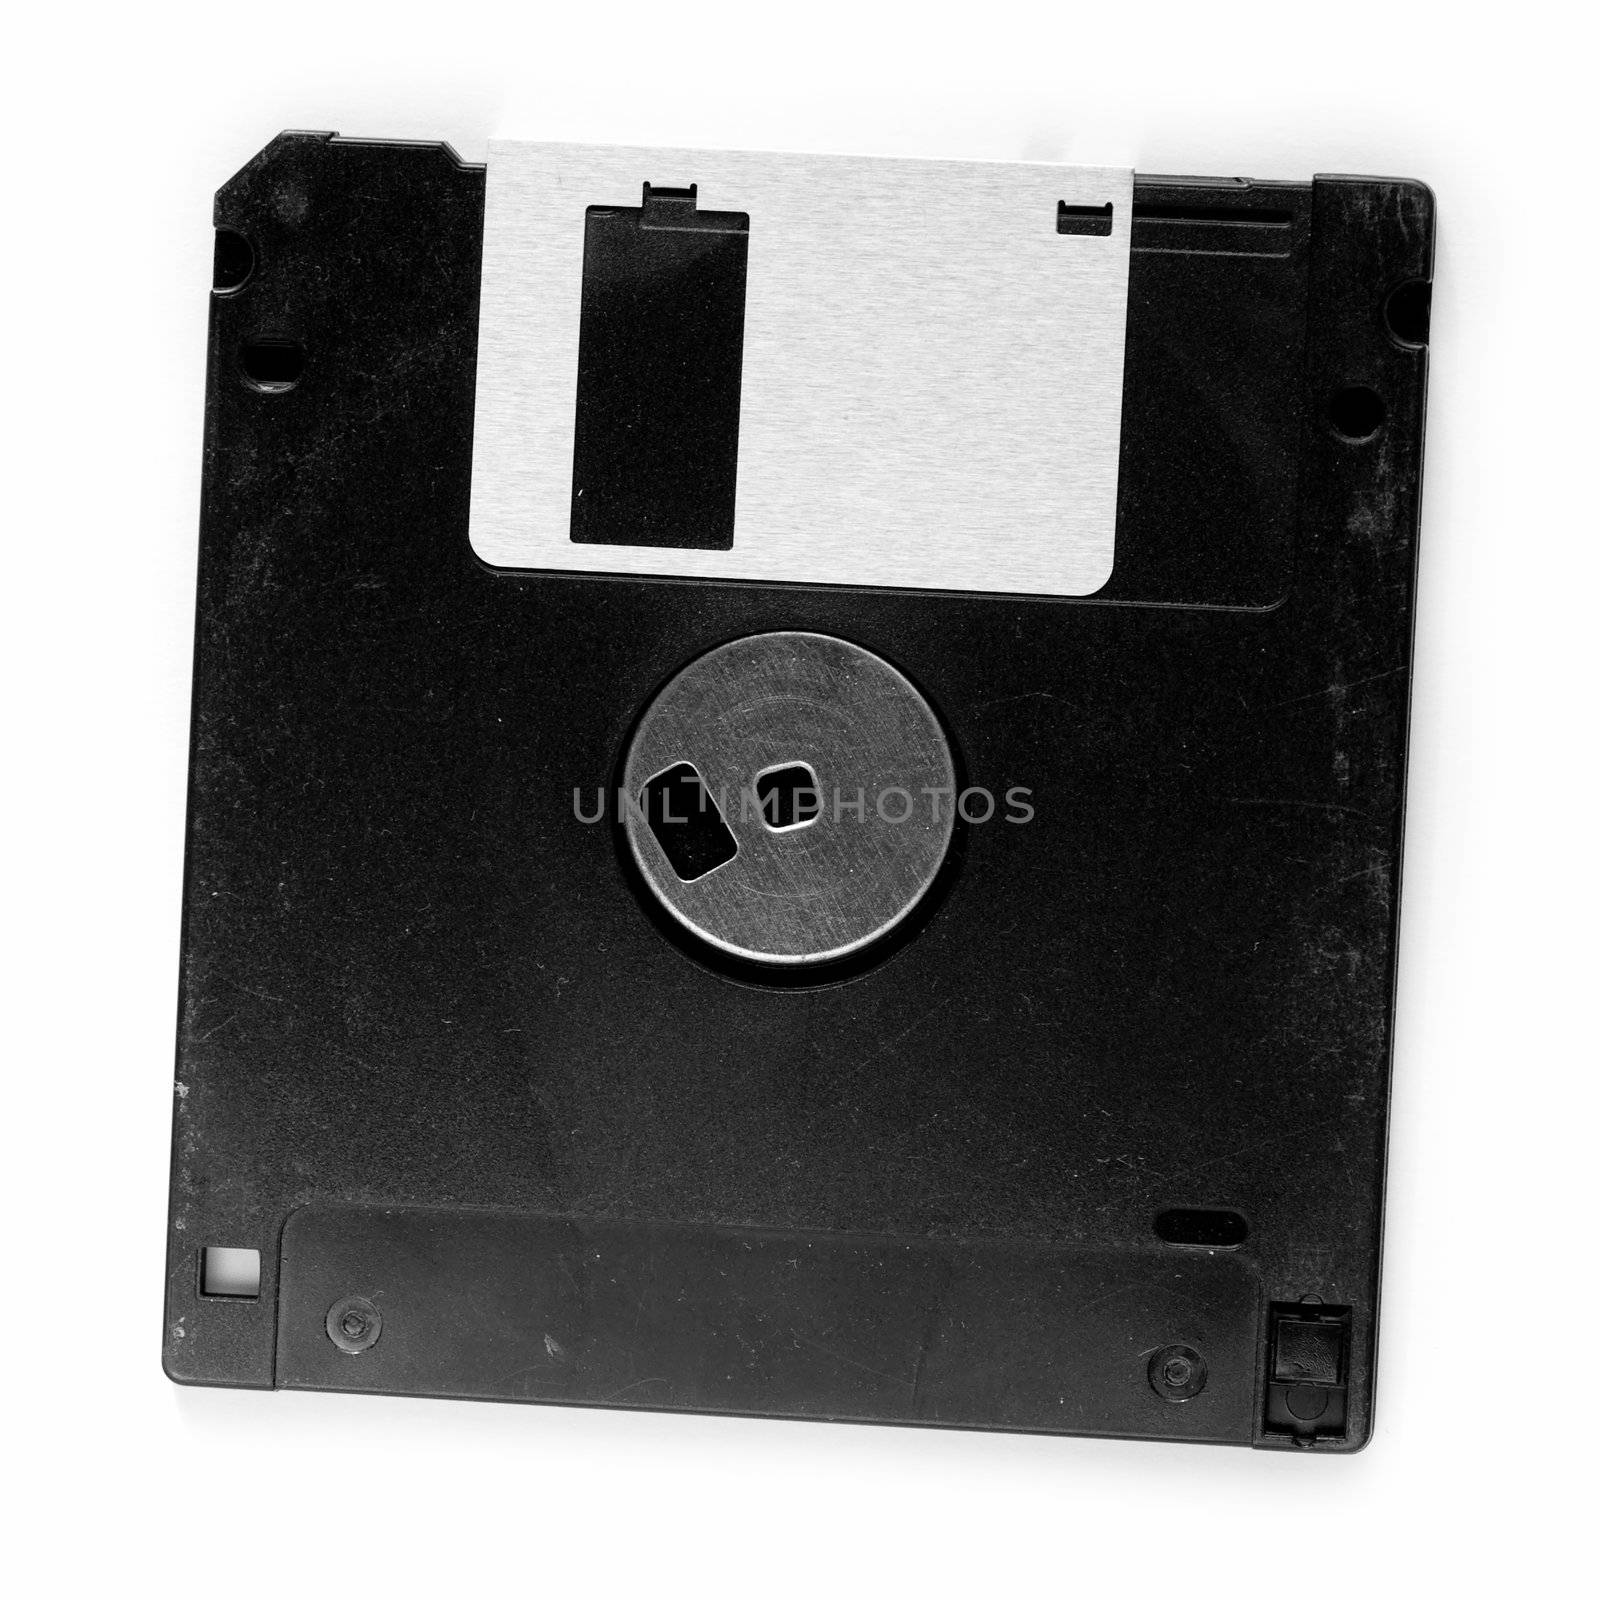 Ancient Technology. Black  floppy disc on a white background